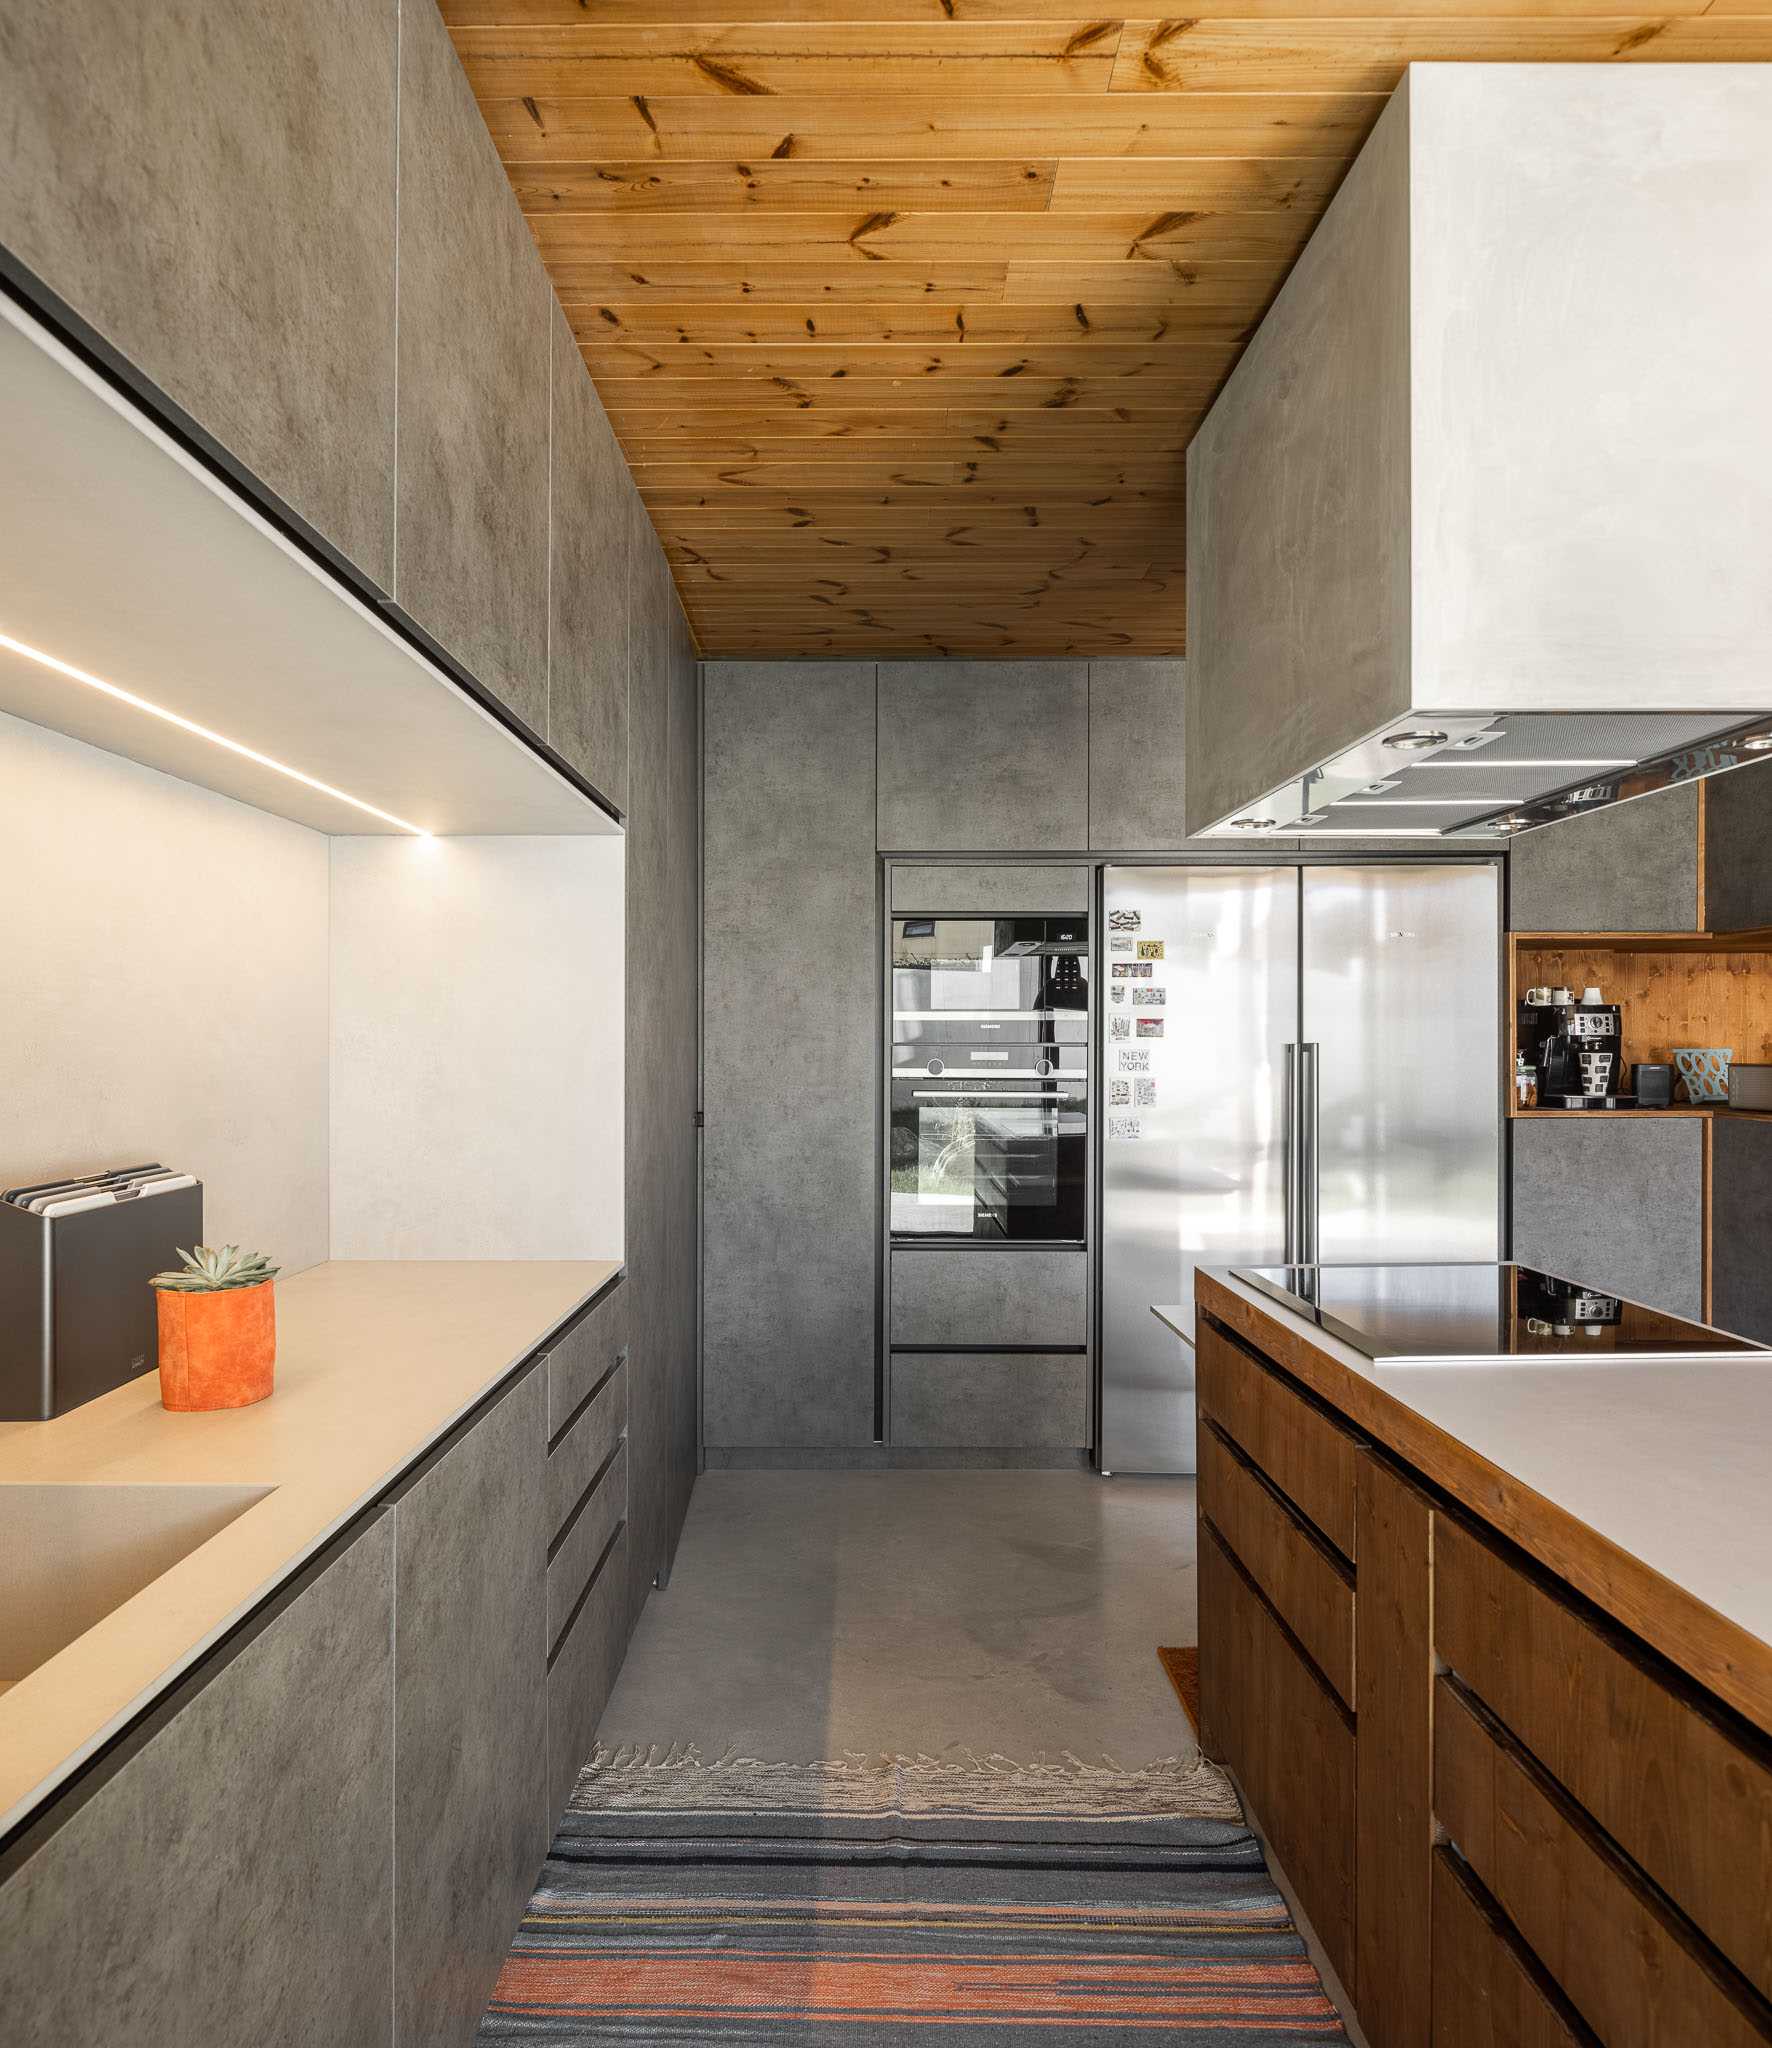 A modern kitchen with a wood ceiling, grey cabinets, and wood island.